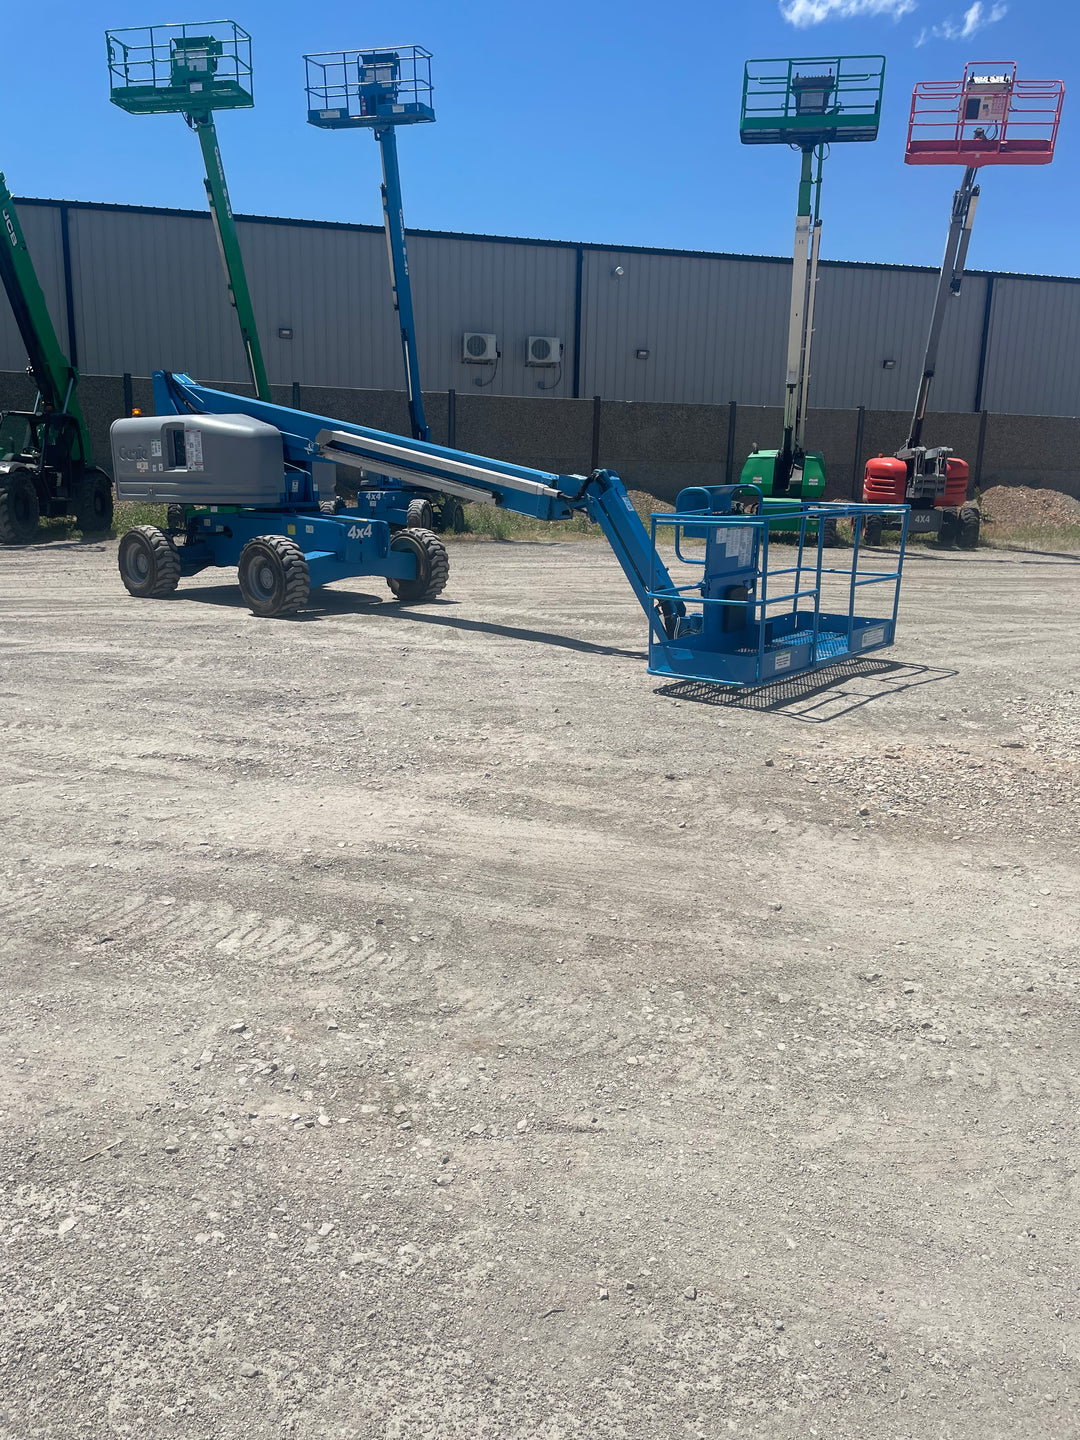 2012 Genie S45 45' Boomlift/Manlift For Sale